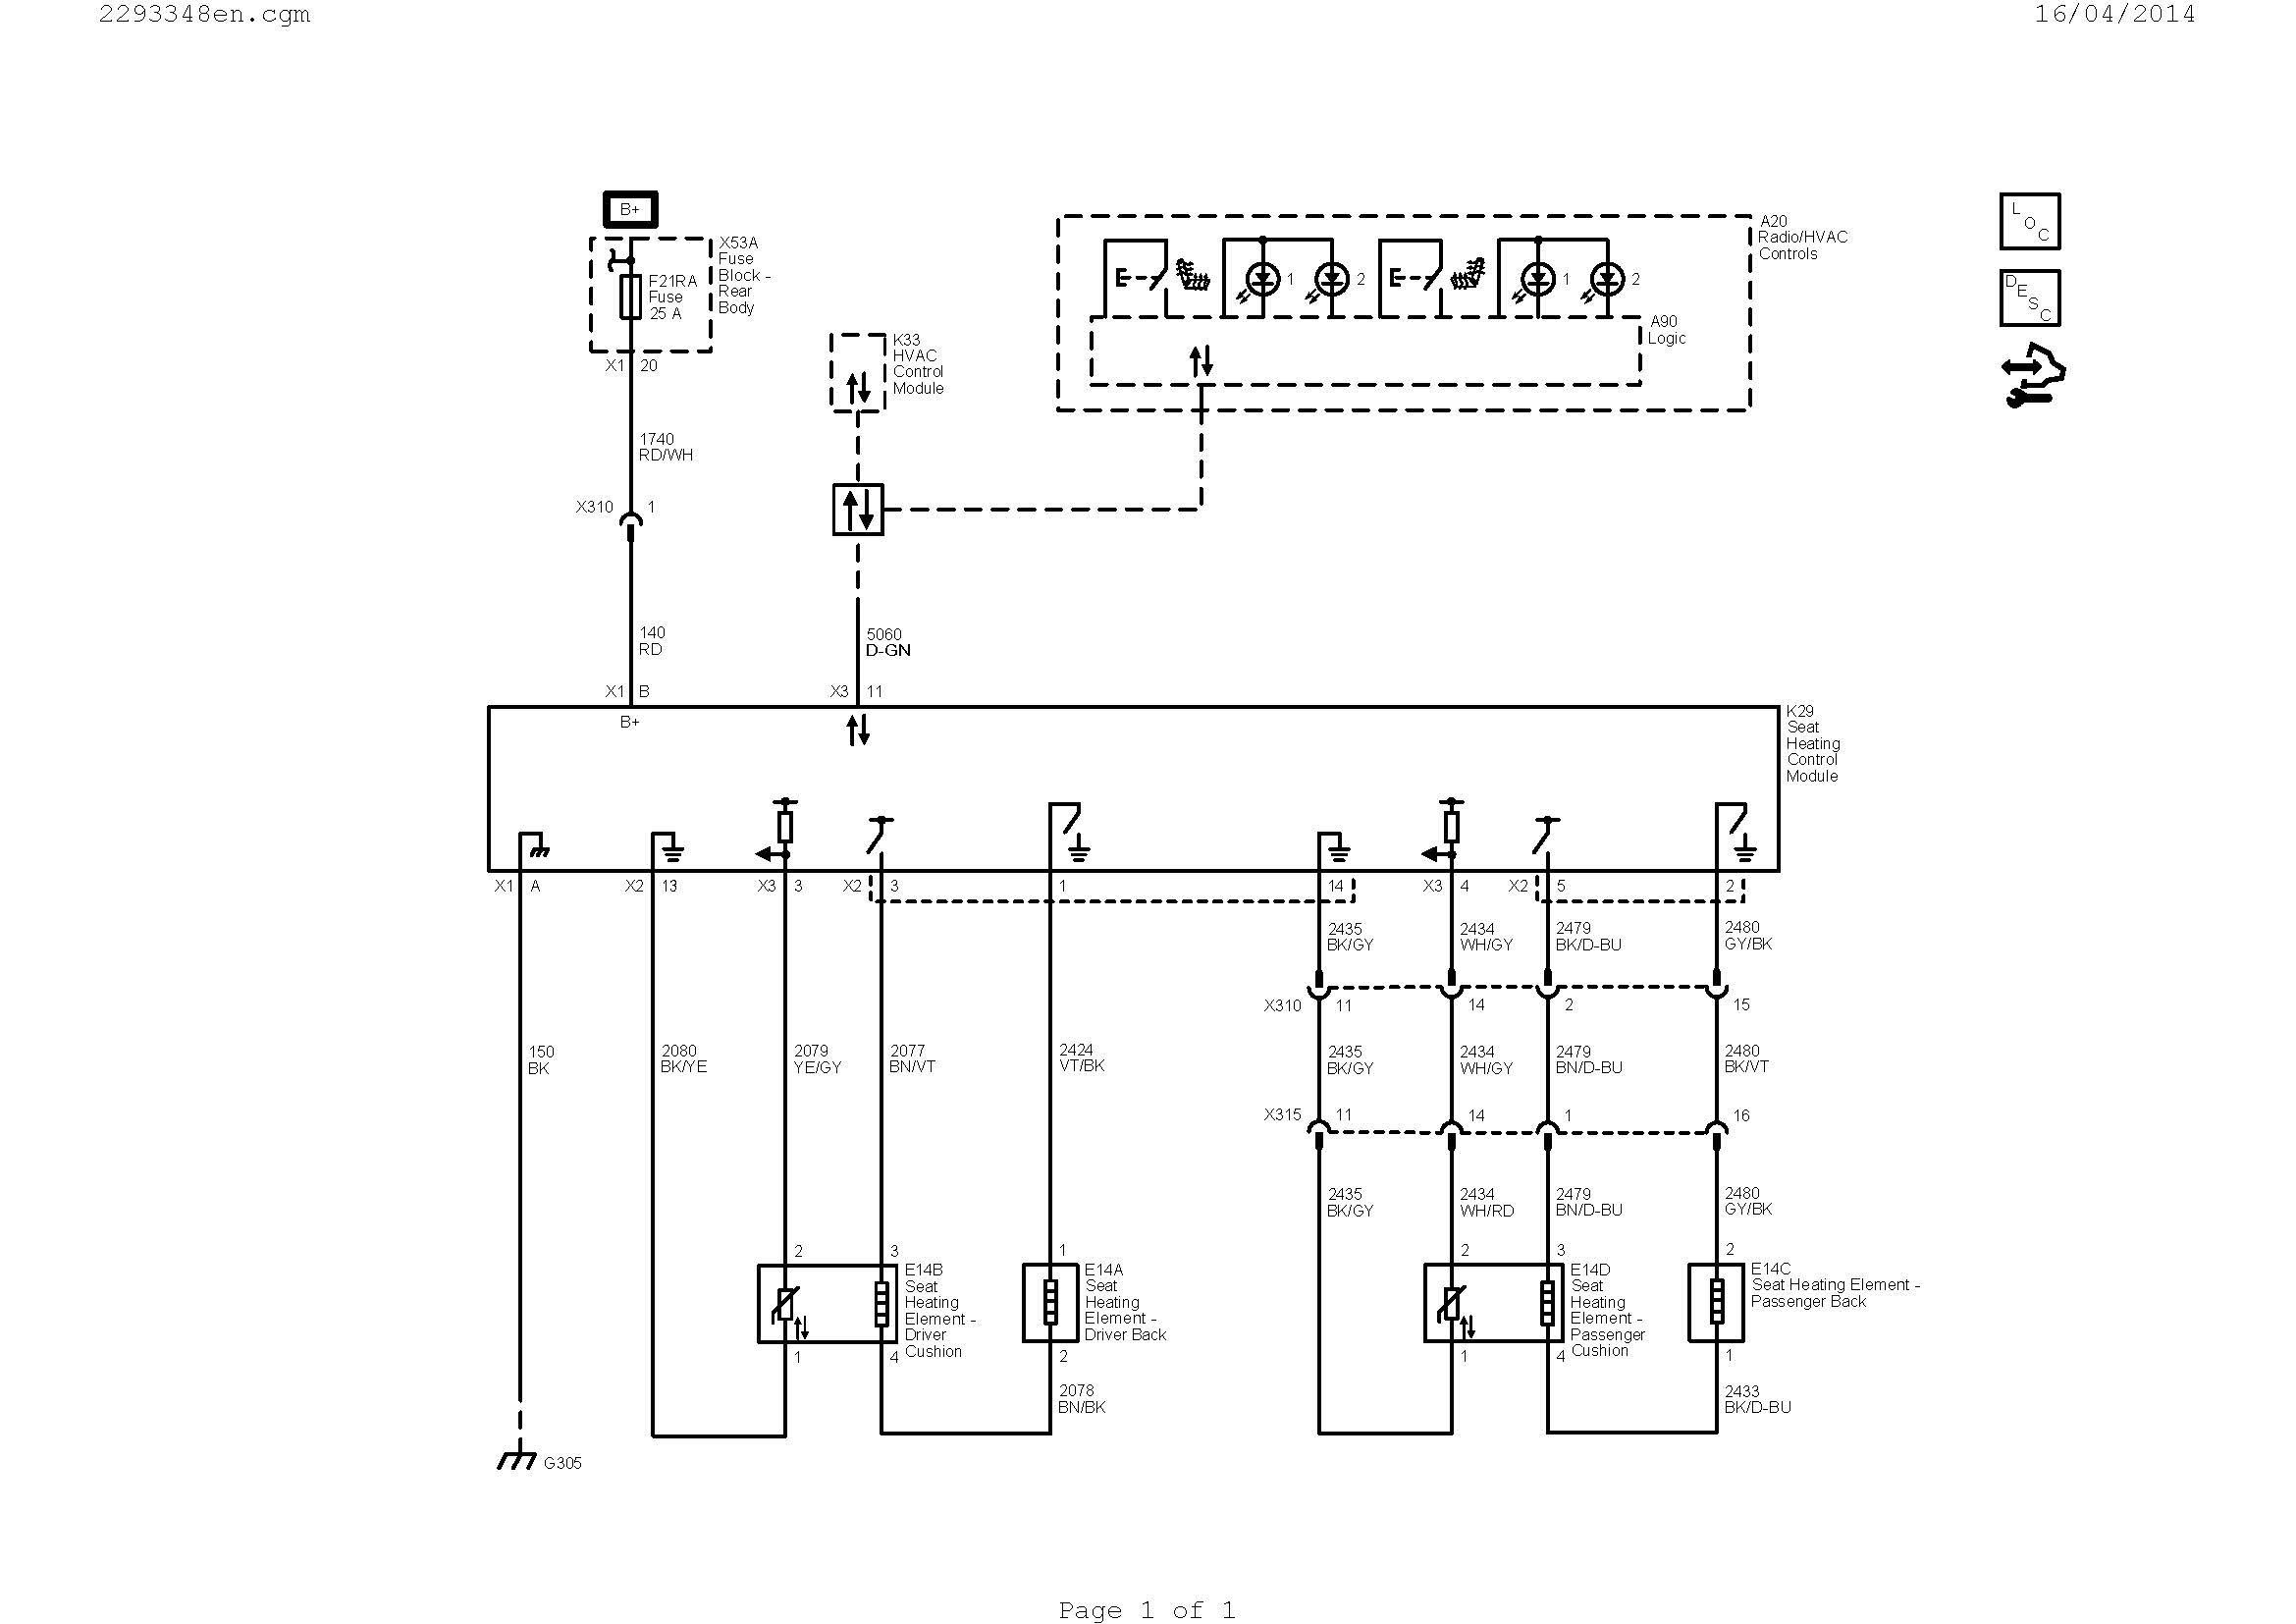 Thermostat Wiring Diagram Wiring A Ac thermostat Diagram New Wiring Diagram Ac Valid Hvac Diagram